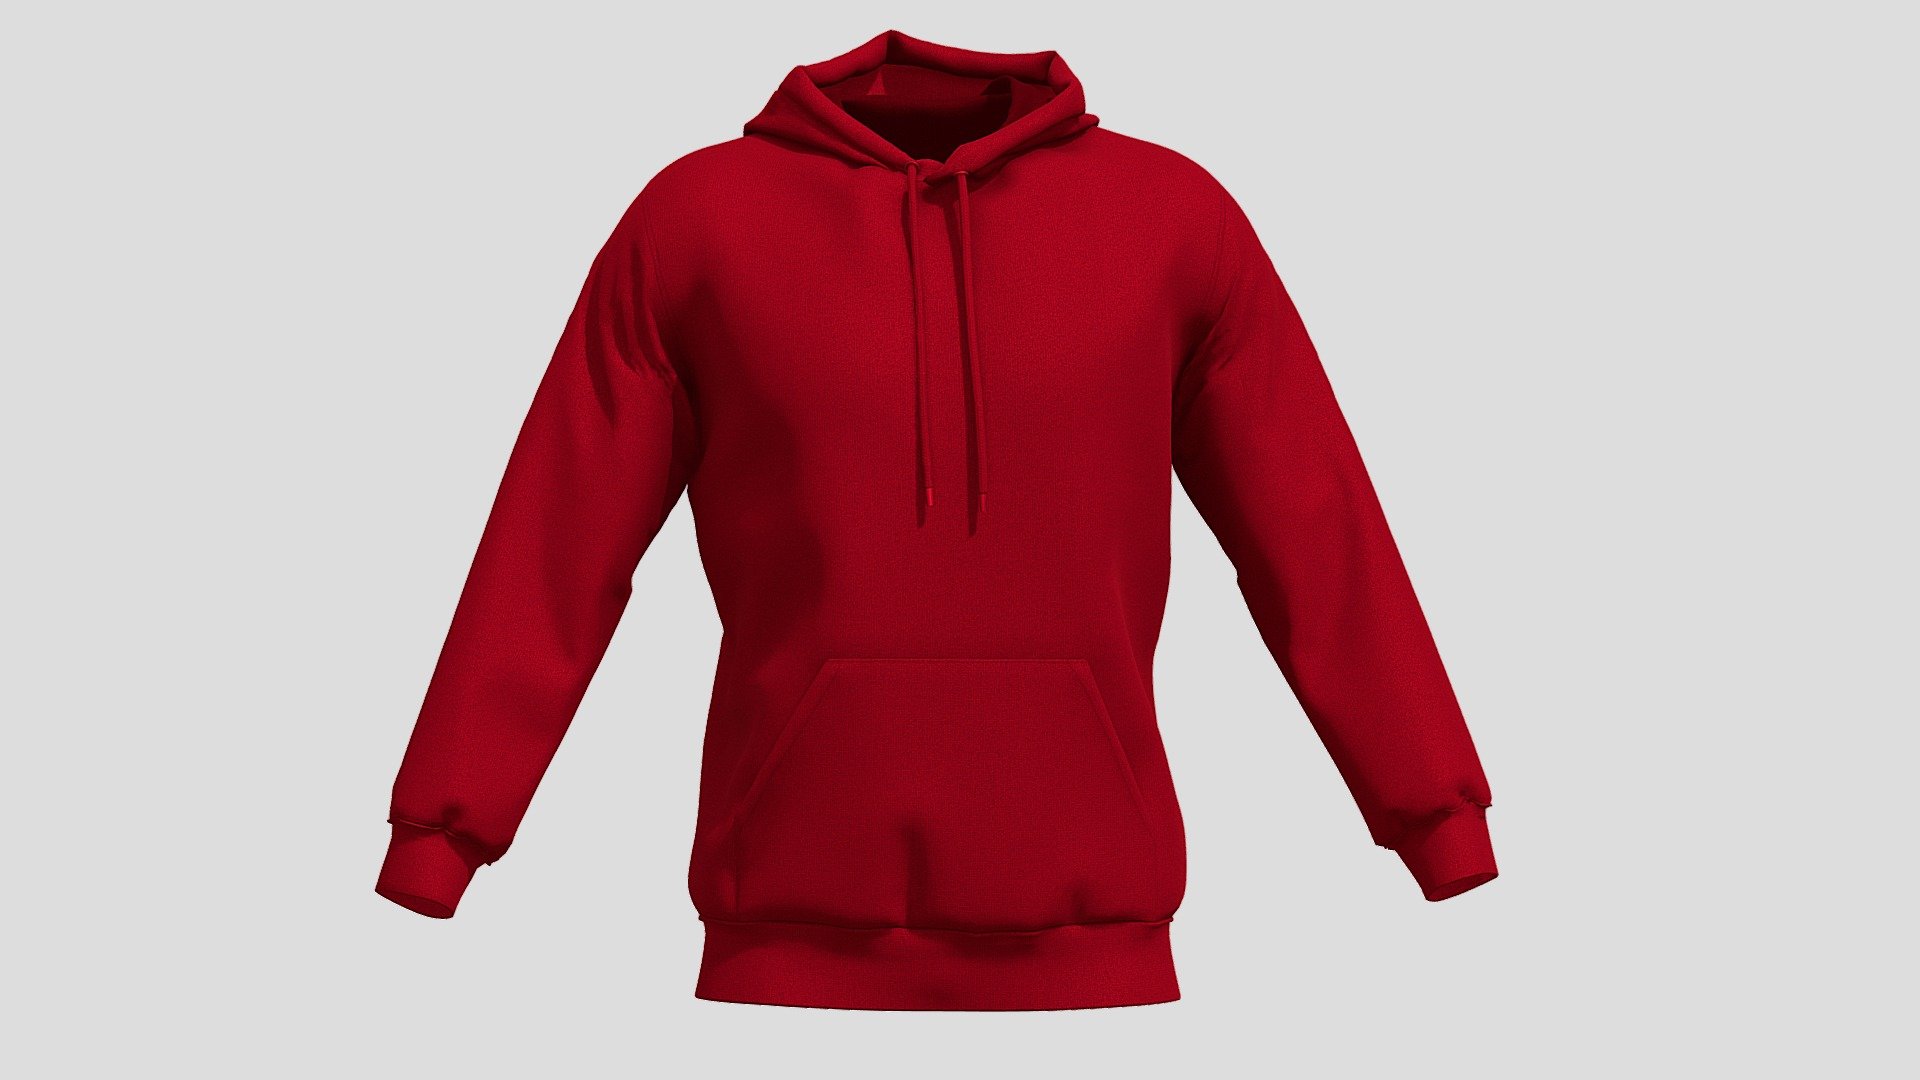 Hi, I'm Frezzy. I am leader of Cgivn studio. We are a team of talented artists working together since 2013.
If you want hire me to do 3d model please touch me at:cgivn.studio Thanks you! - Hoodie Red PBR Realistic - Buy Royalty Free 3D model by Frezzy (@frezzy3d) 3d model